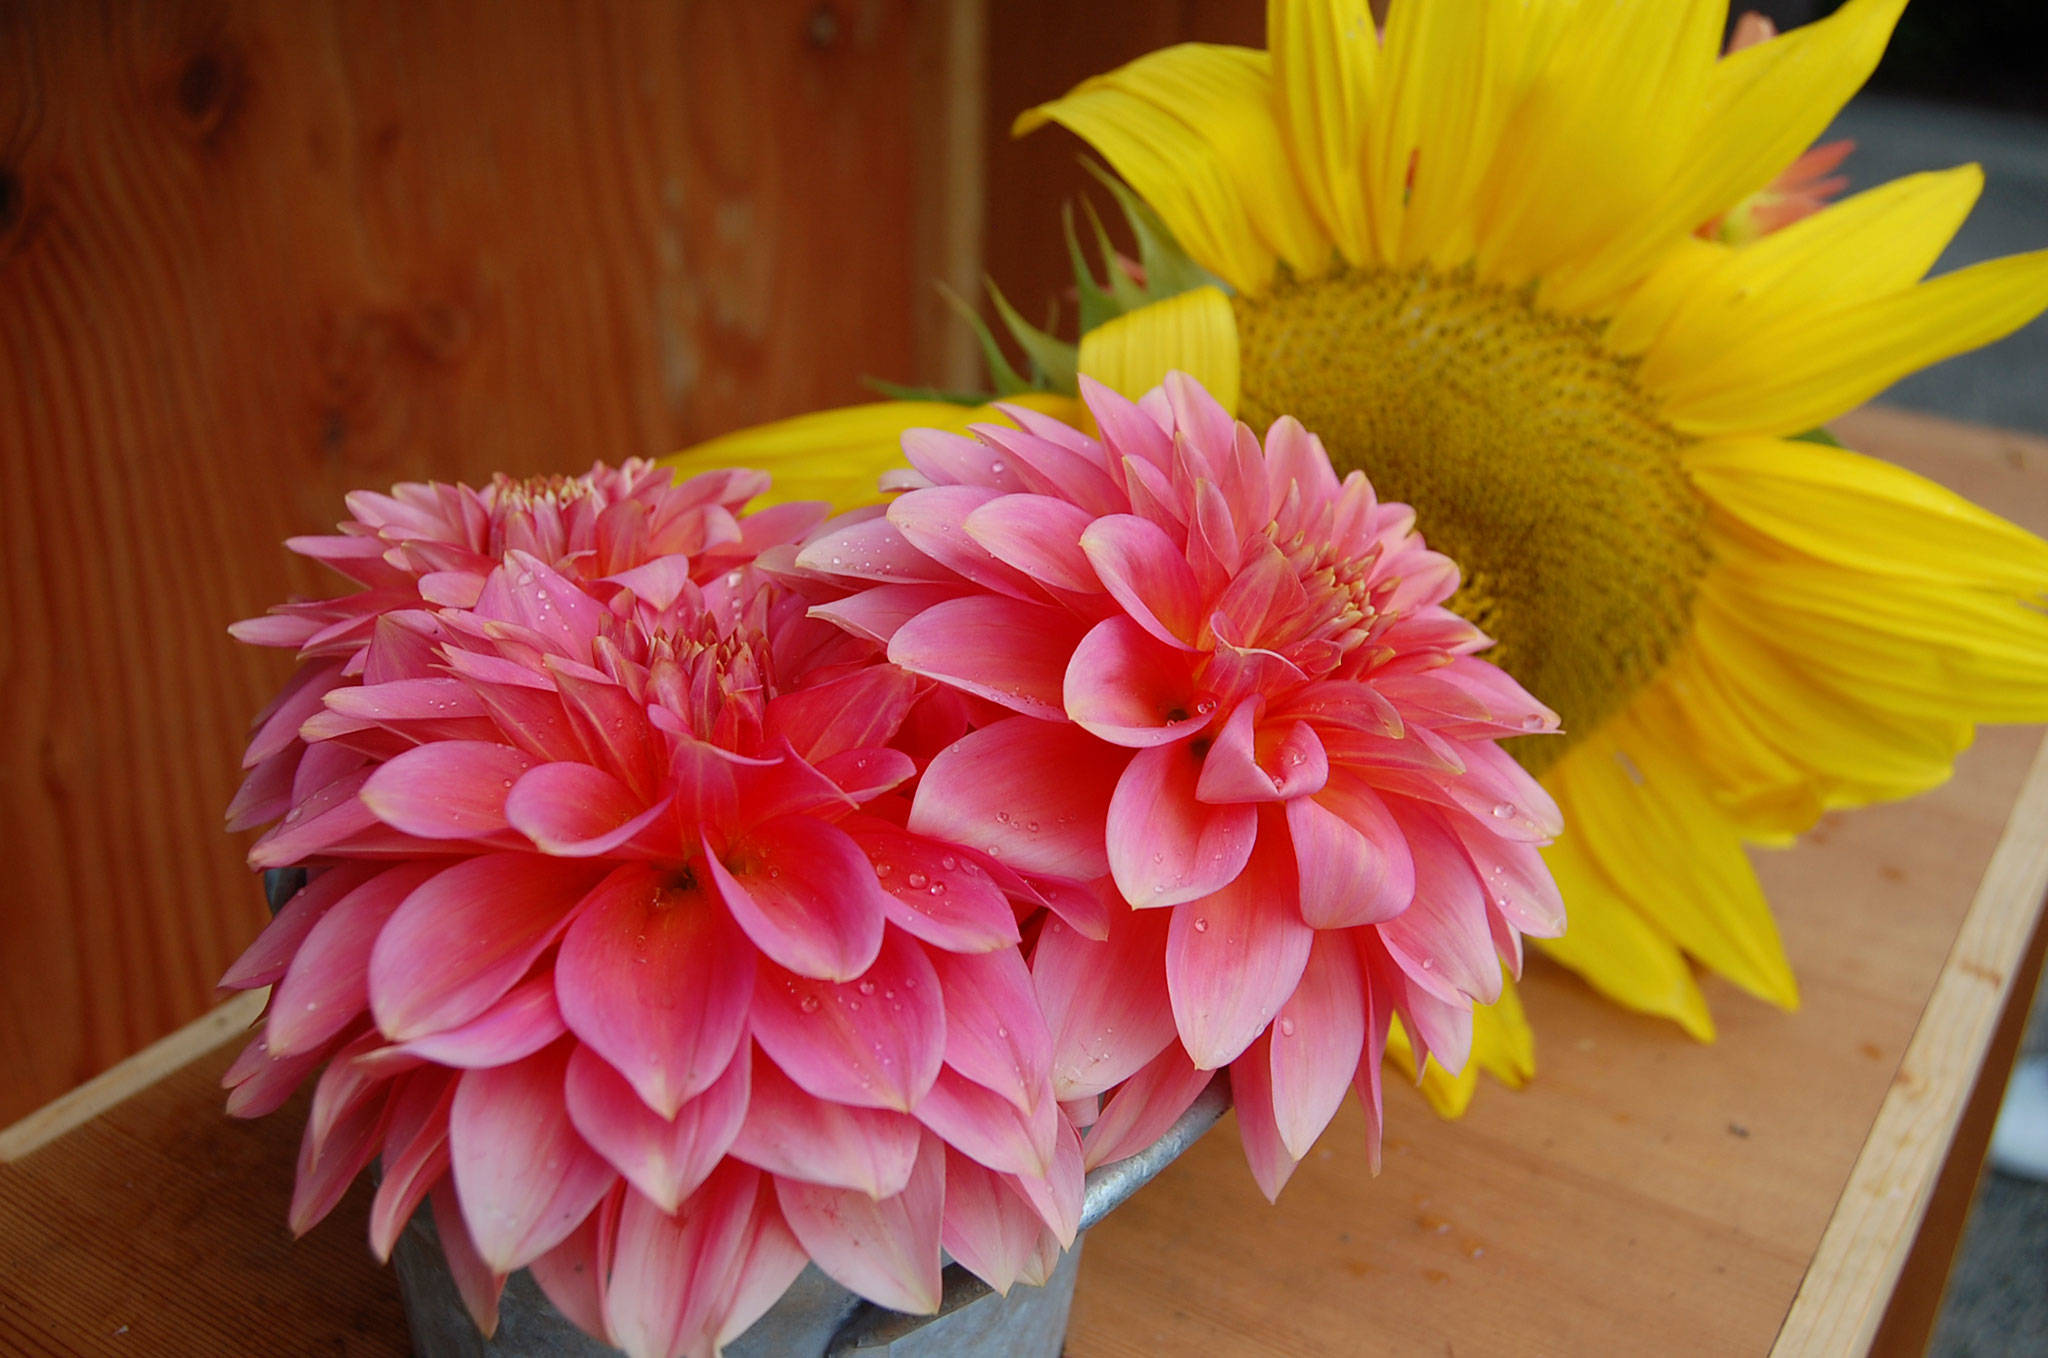 Residents at Mercer Island retirement community Covenant Shores work together to grow dahlias and arrange them into bouquets to give away. Katie Metzger/staff photo